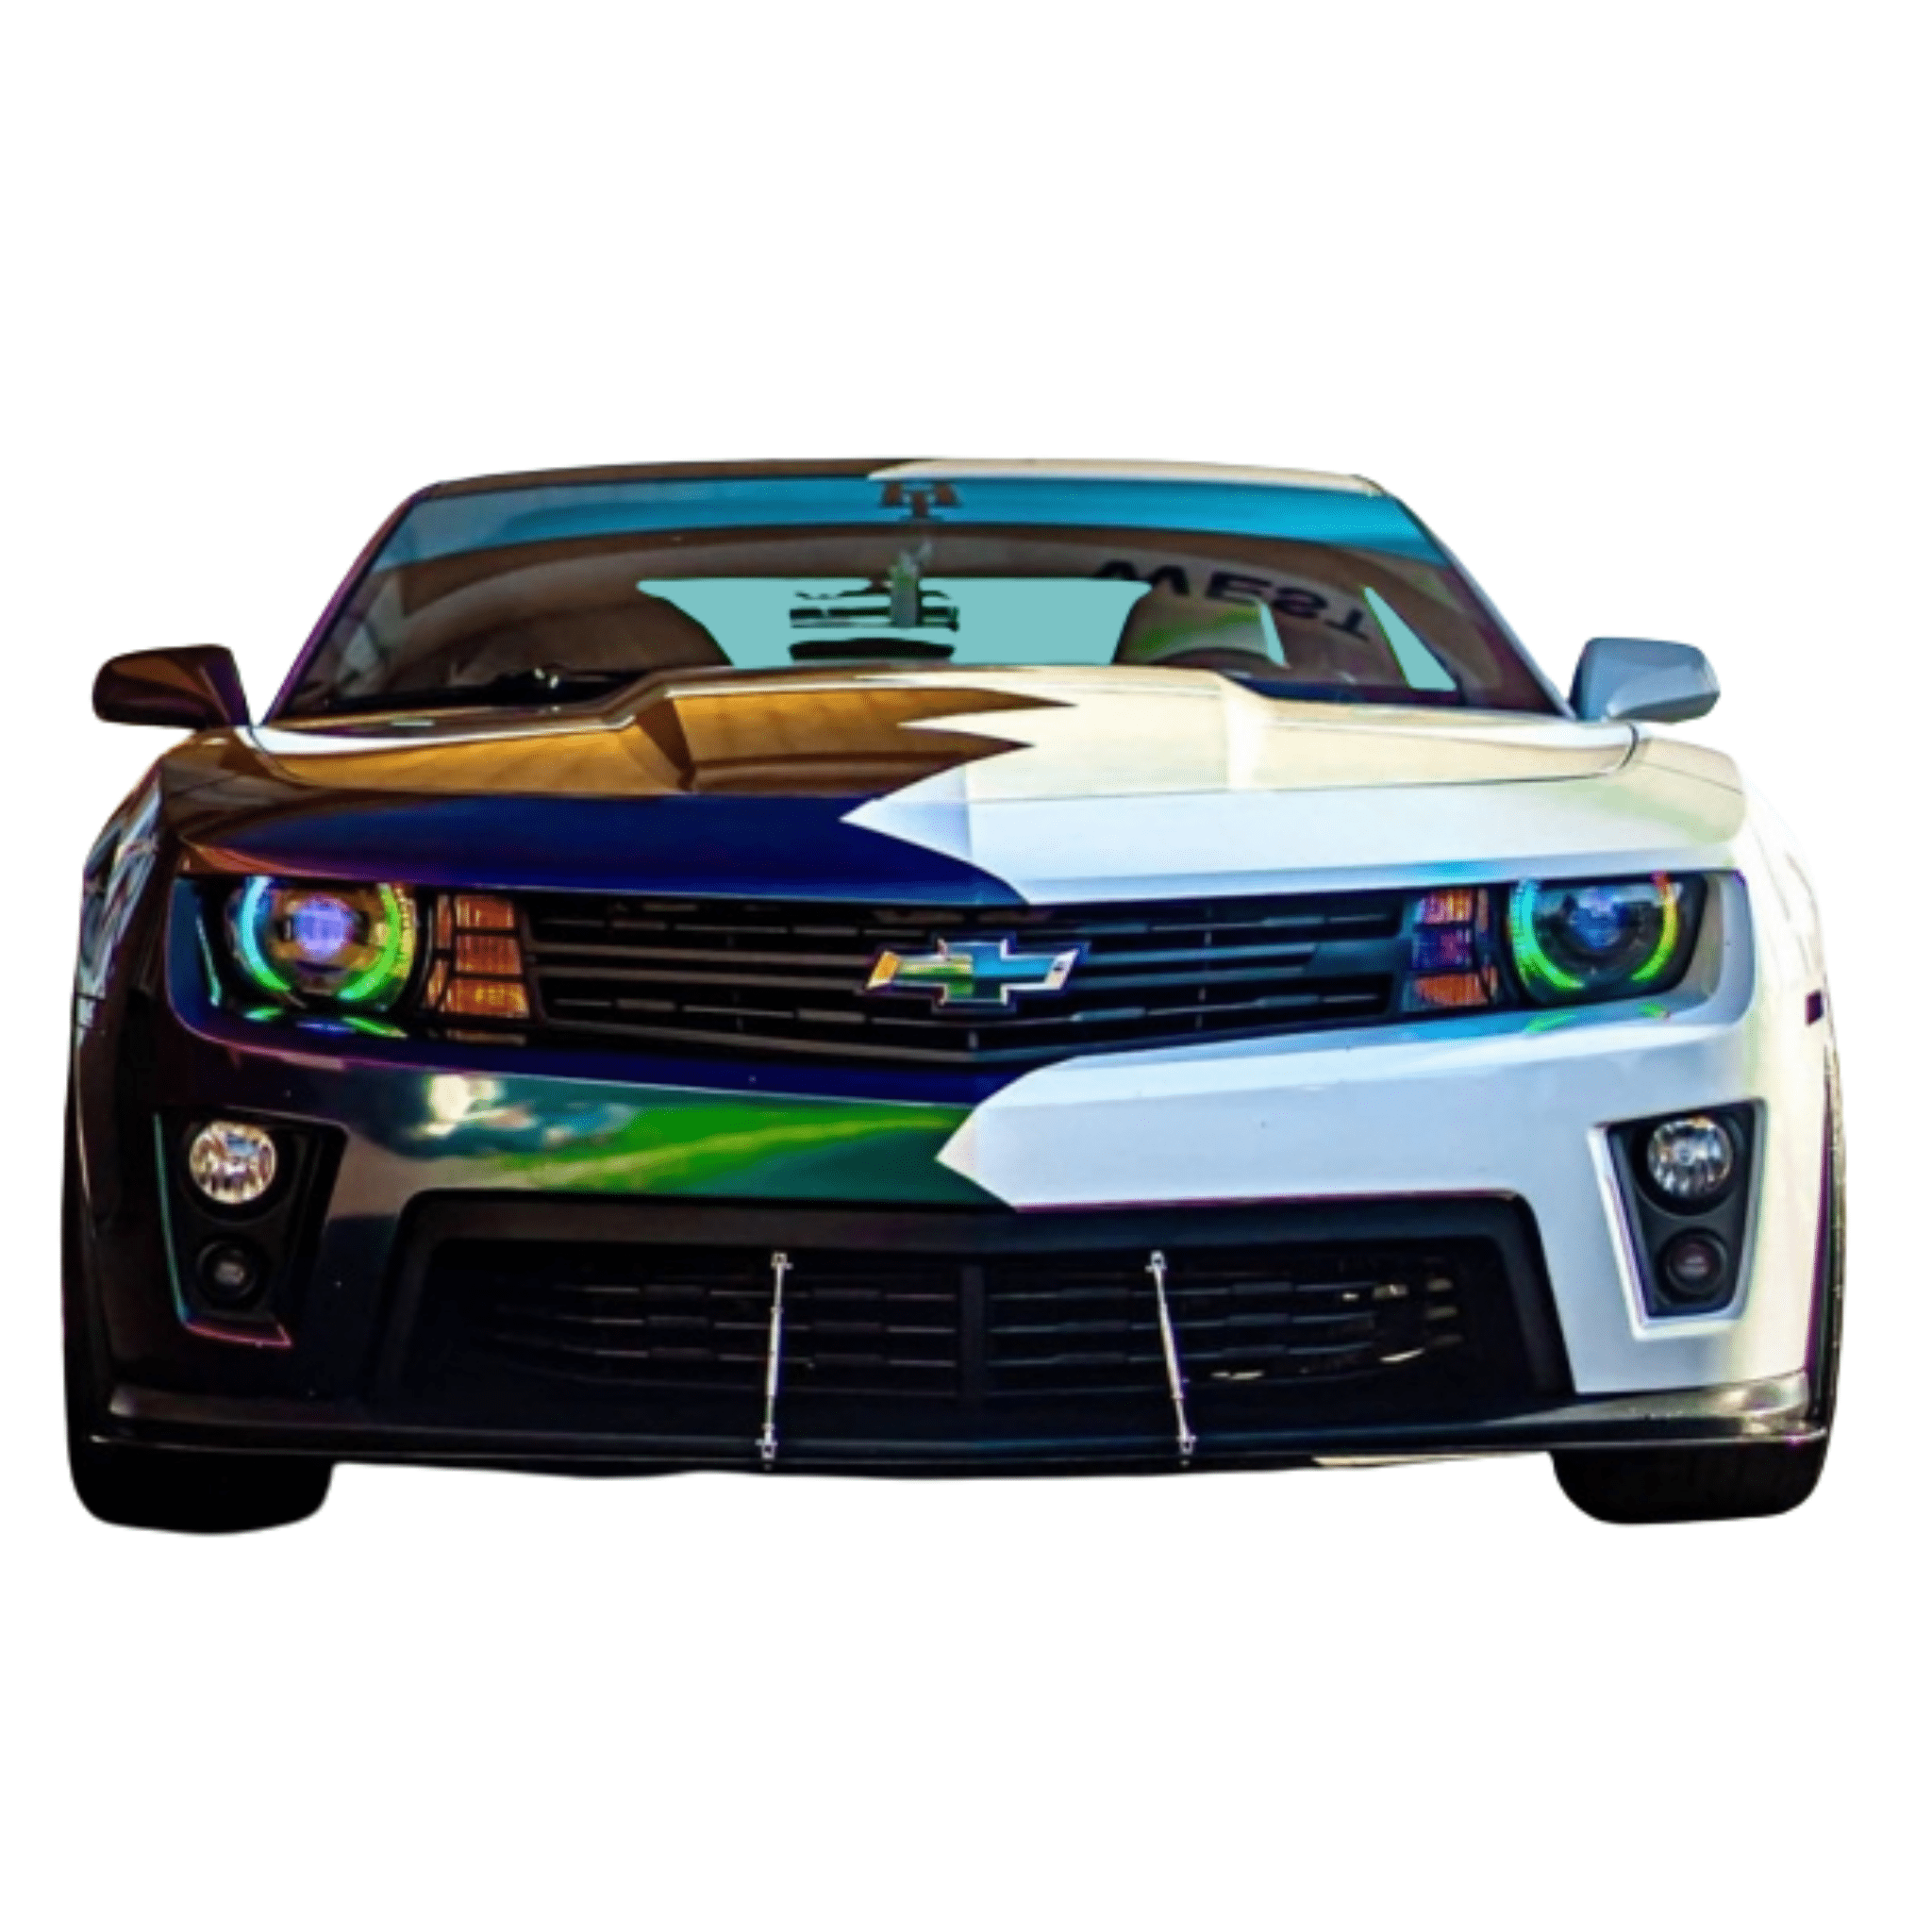 2010-2013 Chevrolet Camaro RS/SS RGBW DRL Boards - RGB Halo Kits Multicolor Flow Series Color Chasing RGBWA LED headlight kit Colorshift Oracle Lighting Trendz OneUpLighting Morimoto theretrofitsource AutoLEDTech Diode Dynamics